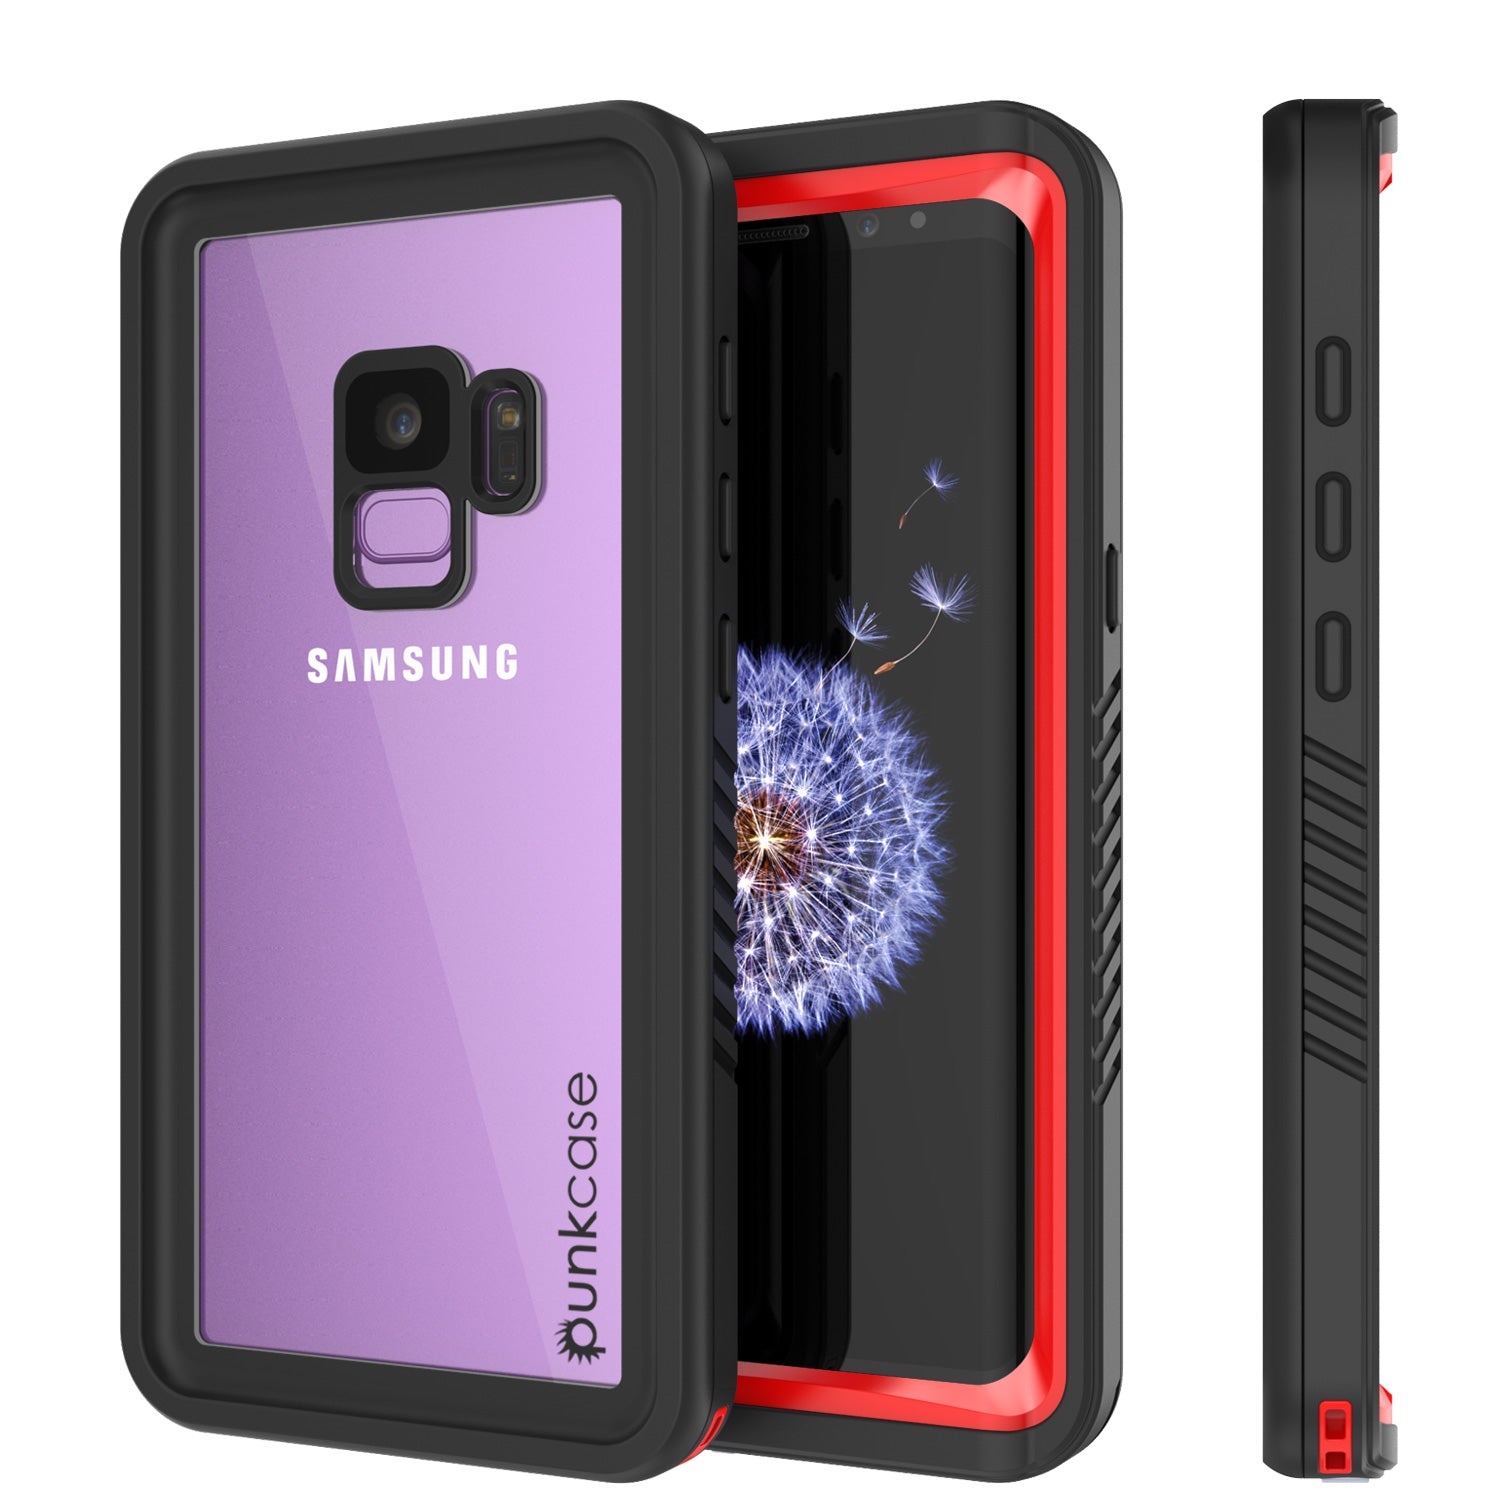 Punkcase Galaxy S9+ Plus Extreme Series Waterproof Body | Red